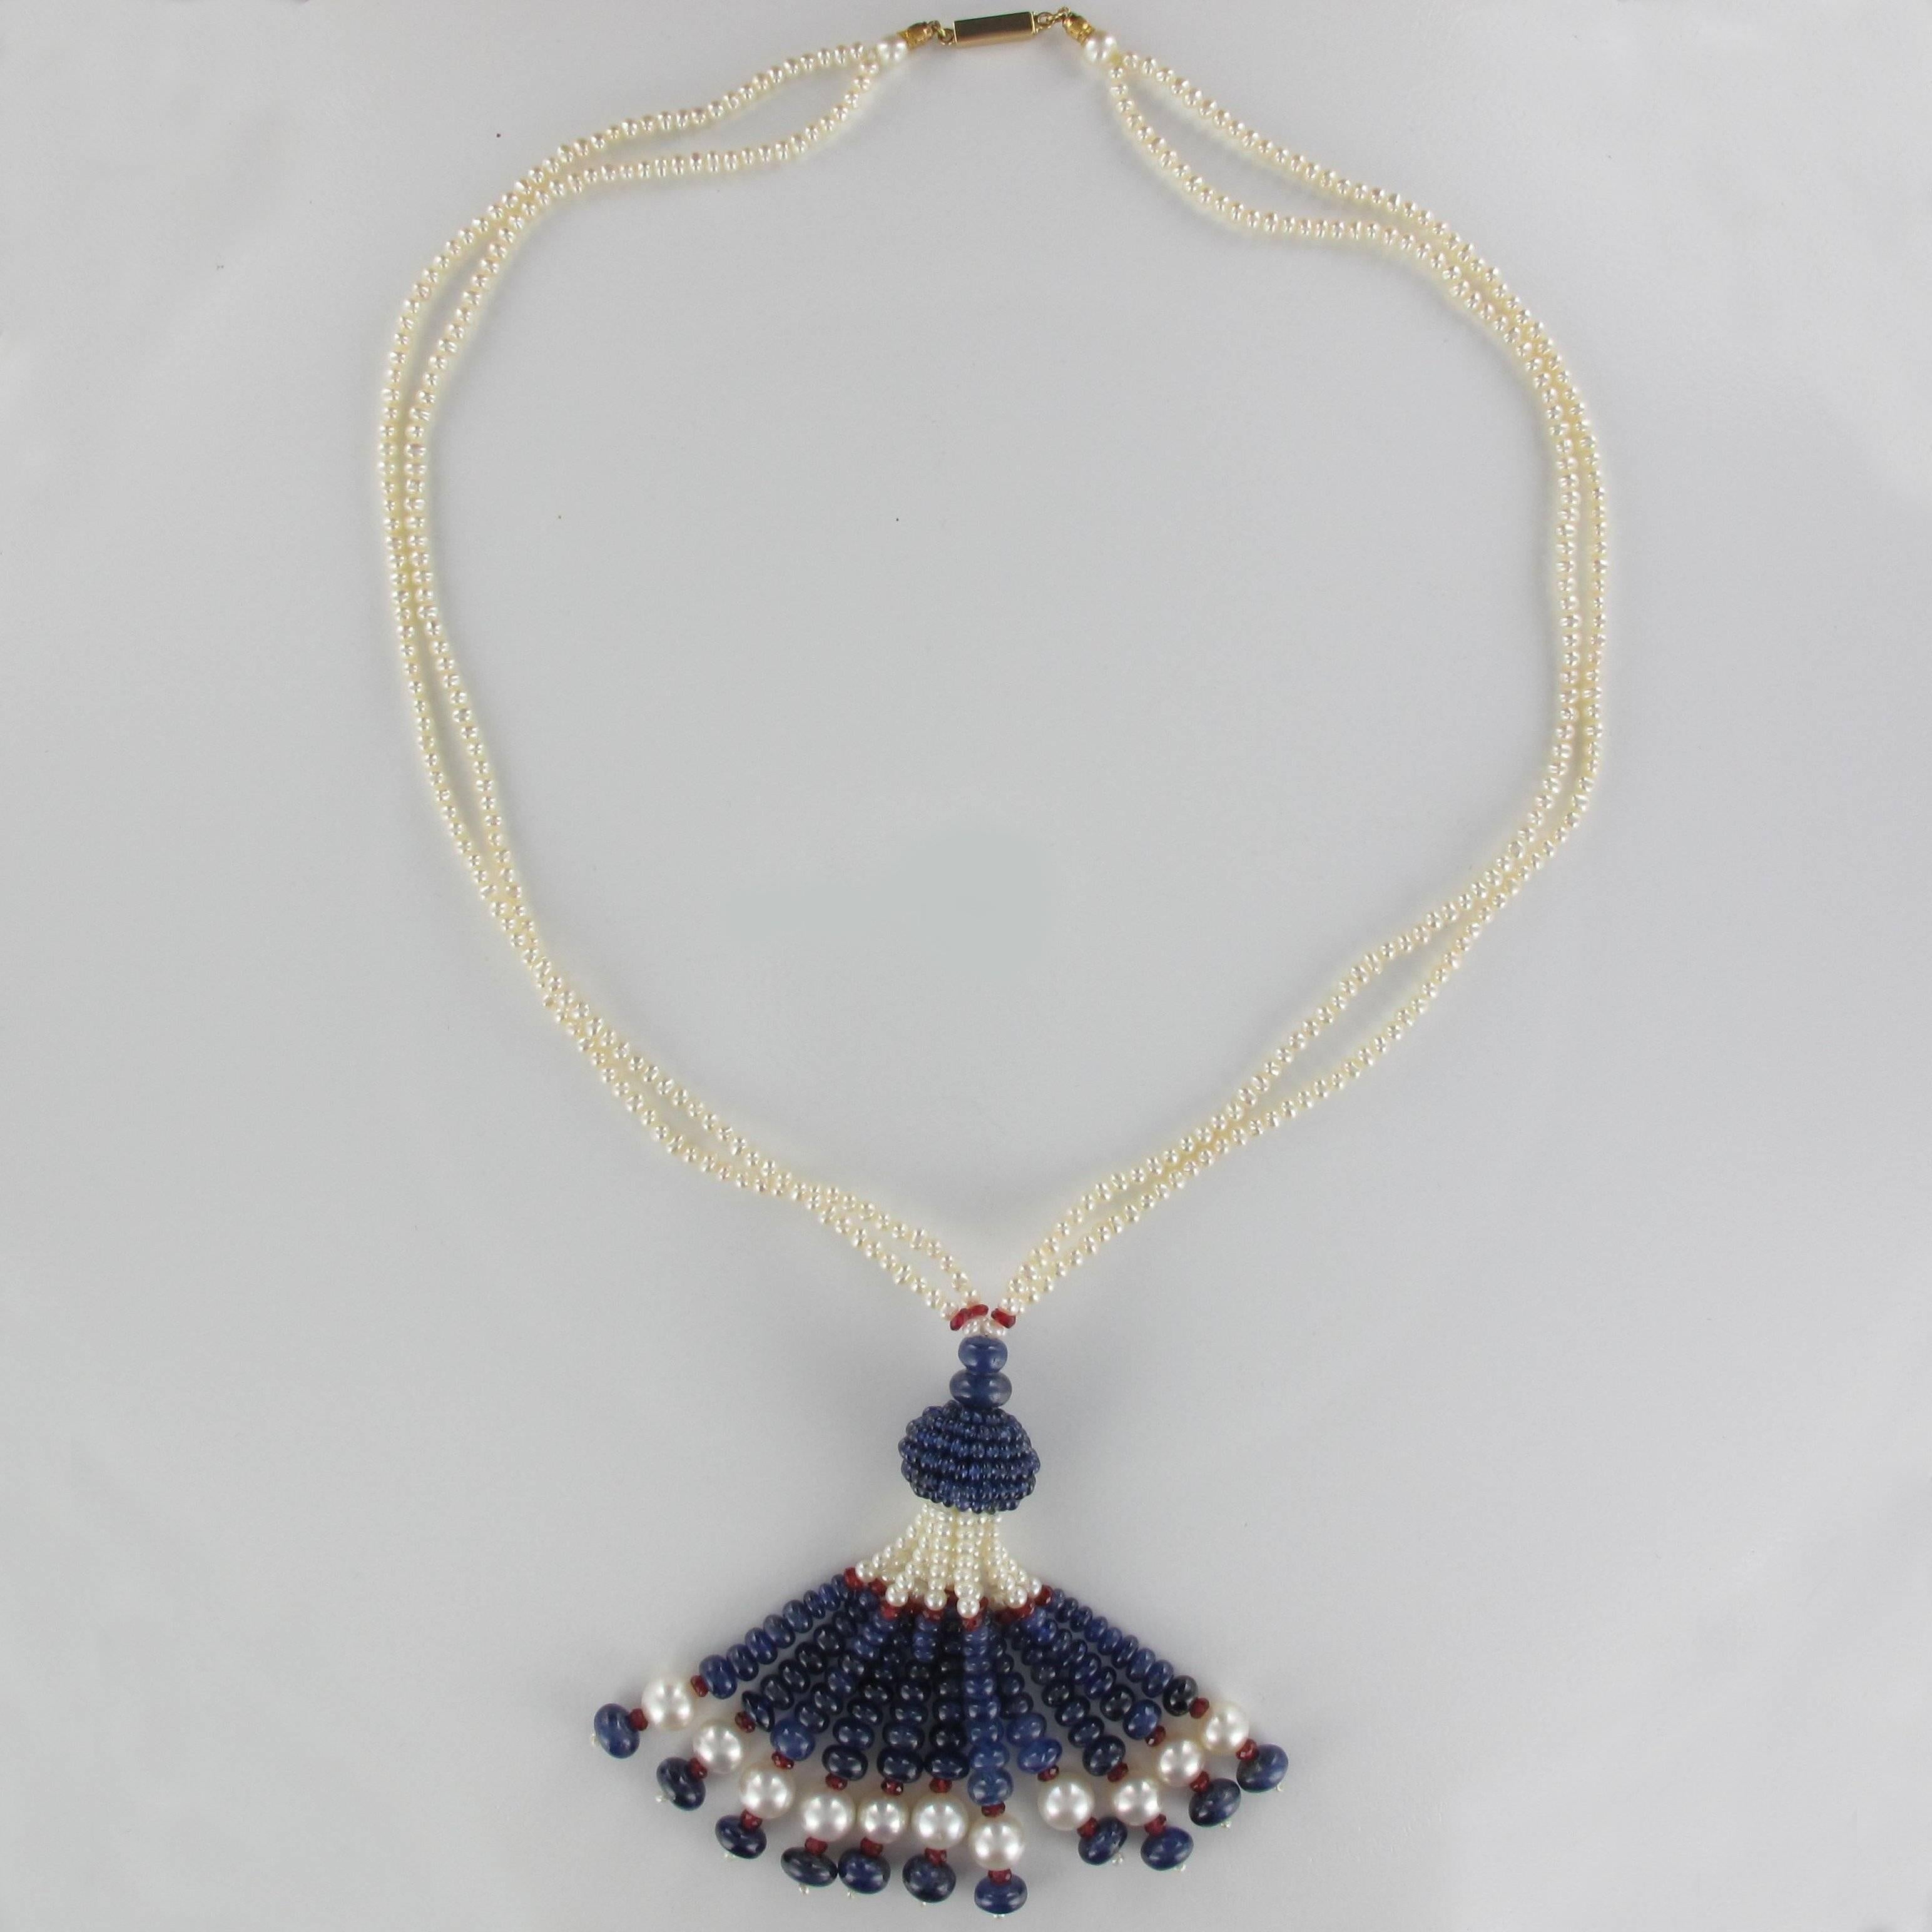 Baume creation - Unique piece.
Pendant in the form of a pompom composed of round and flat sapphire beads, oriental white cultured pearls and flat tourmaline beads. It is secured at each side by cultured white oriental pearls. The clasp is of 18